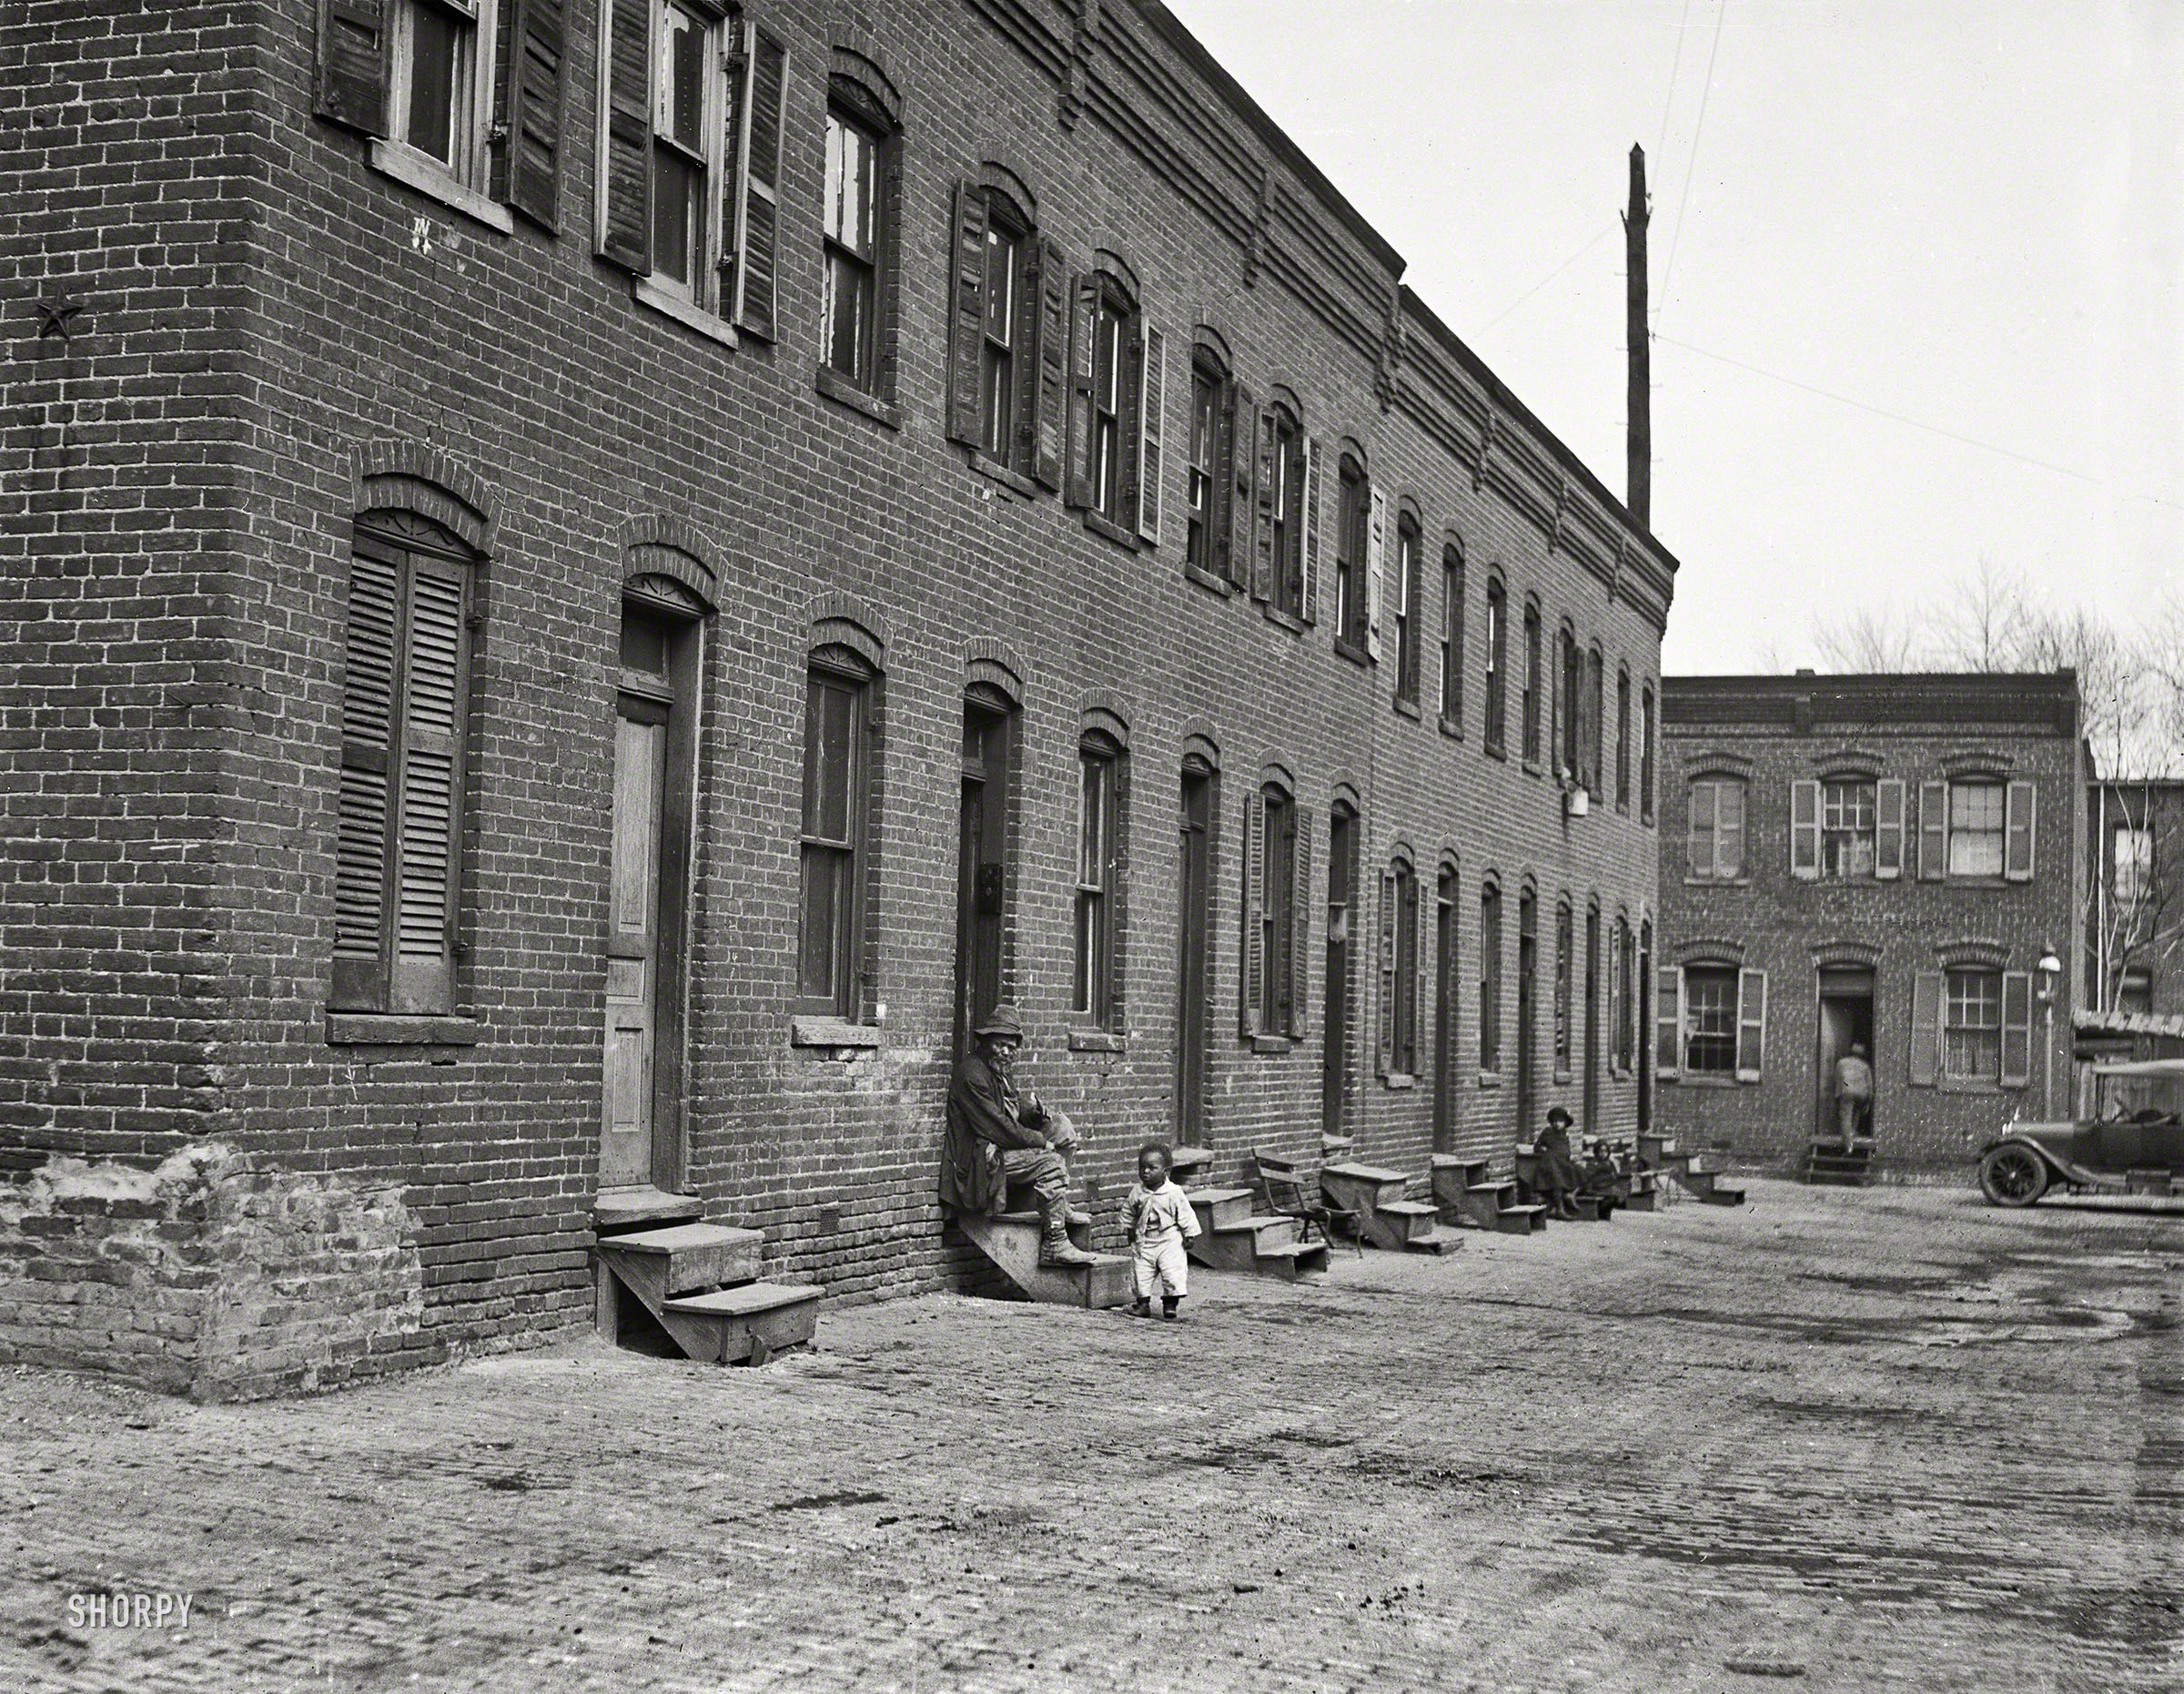 "City rowhouses, 1923." Another glimpse of back-alley Washington, D.C. Added bonus: a nice turnbuckle star. Harris & Ewing glass negative. View full size.